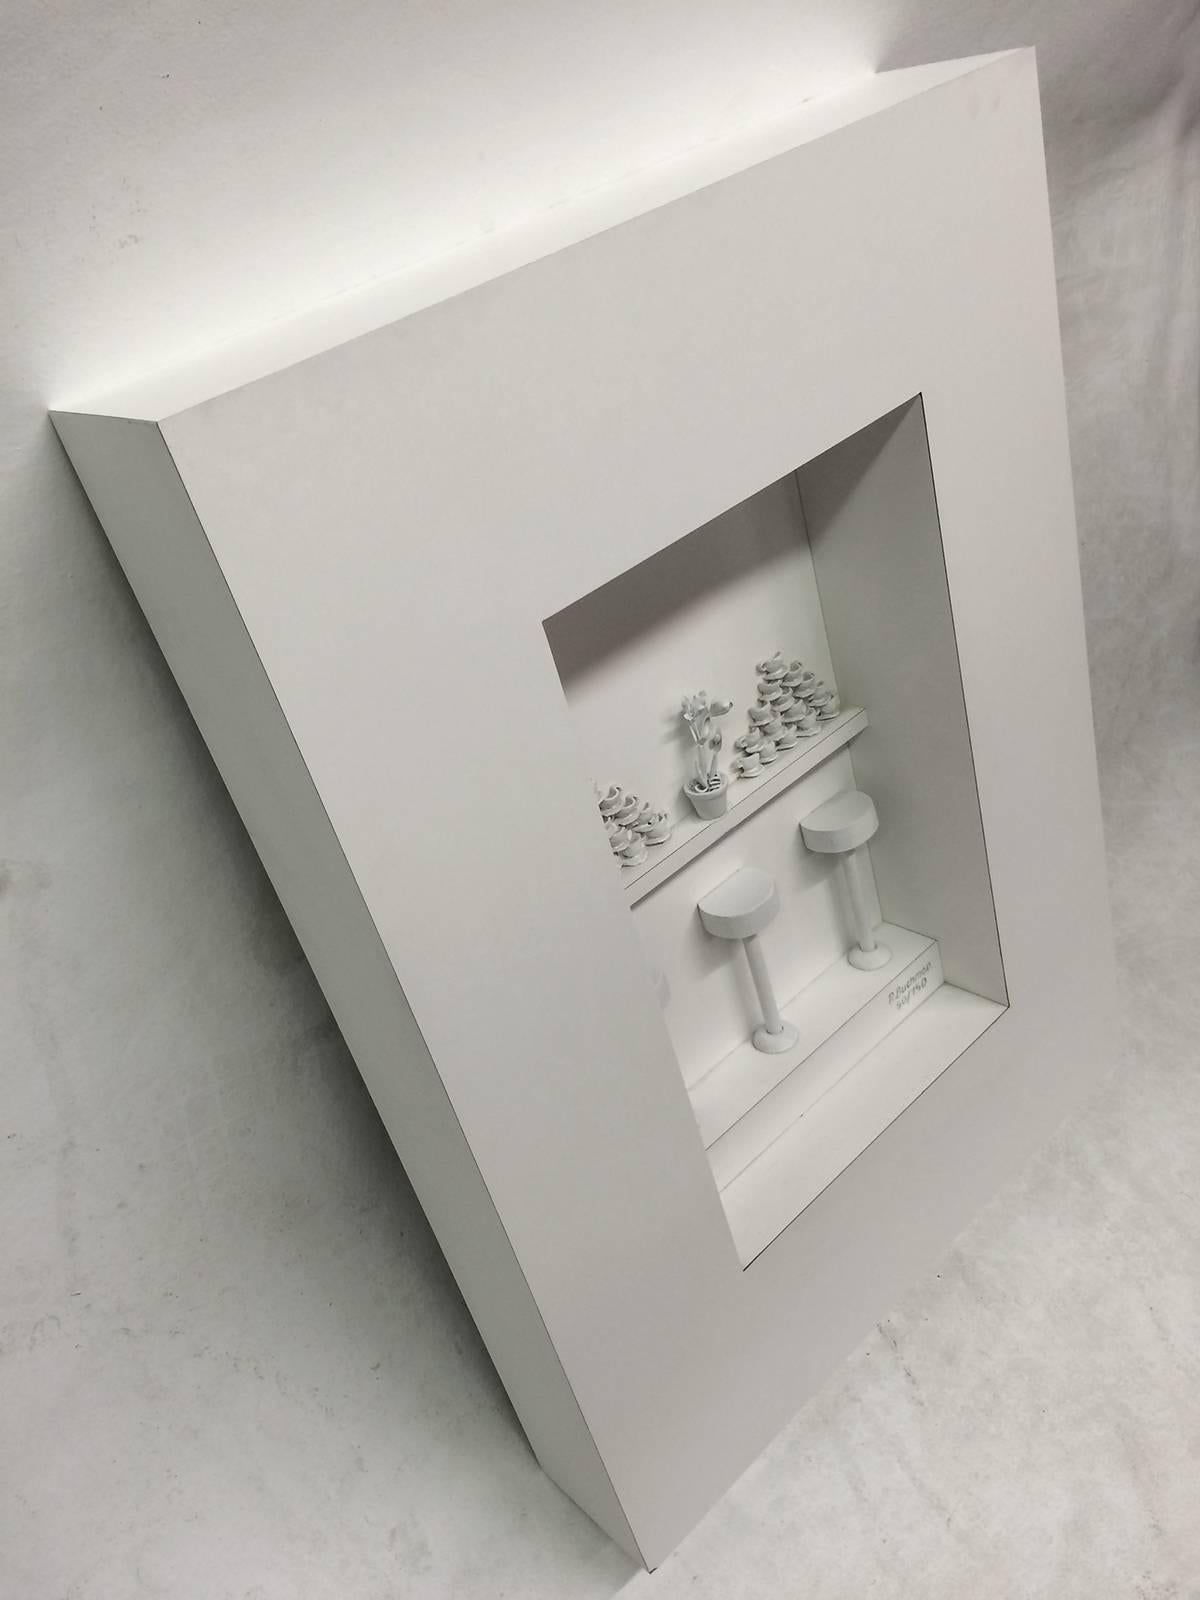 Three-dimensional wall sculpture in Formica, wood and clay with the stamp of 